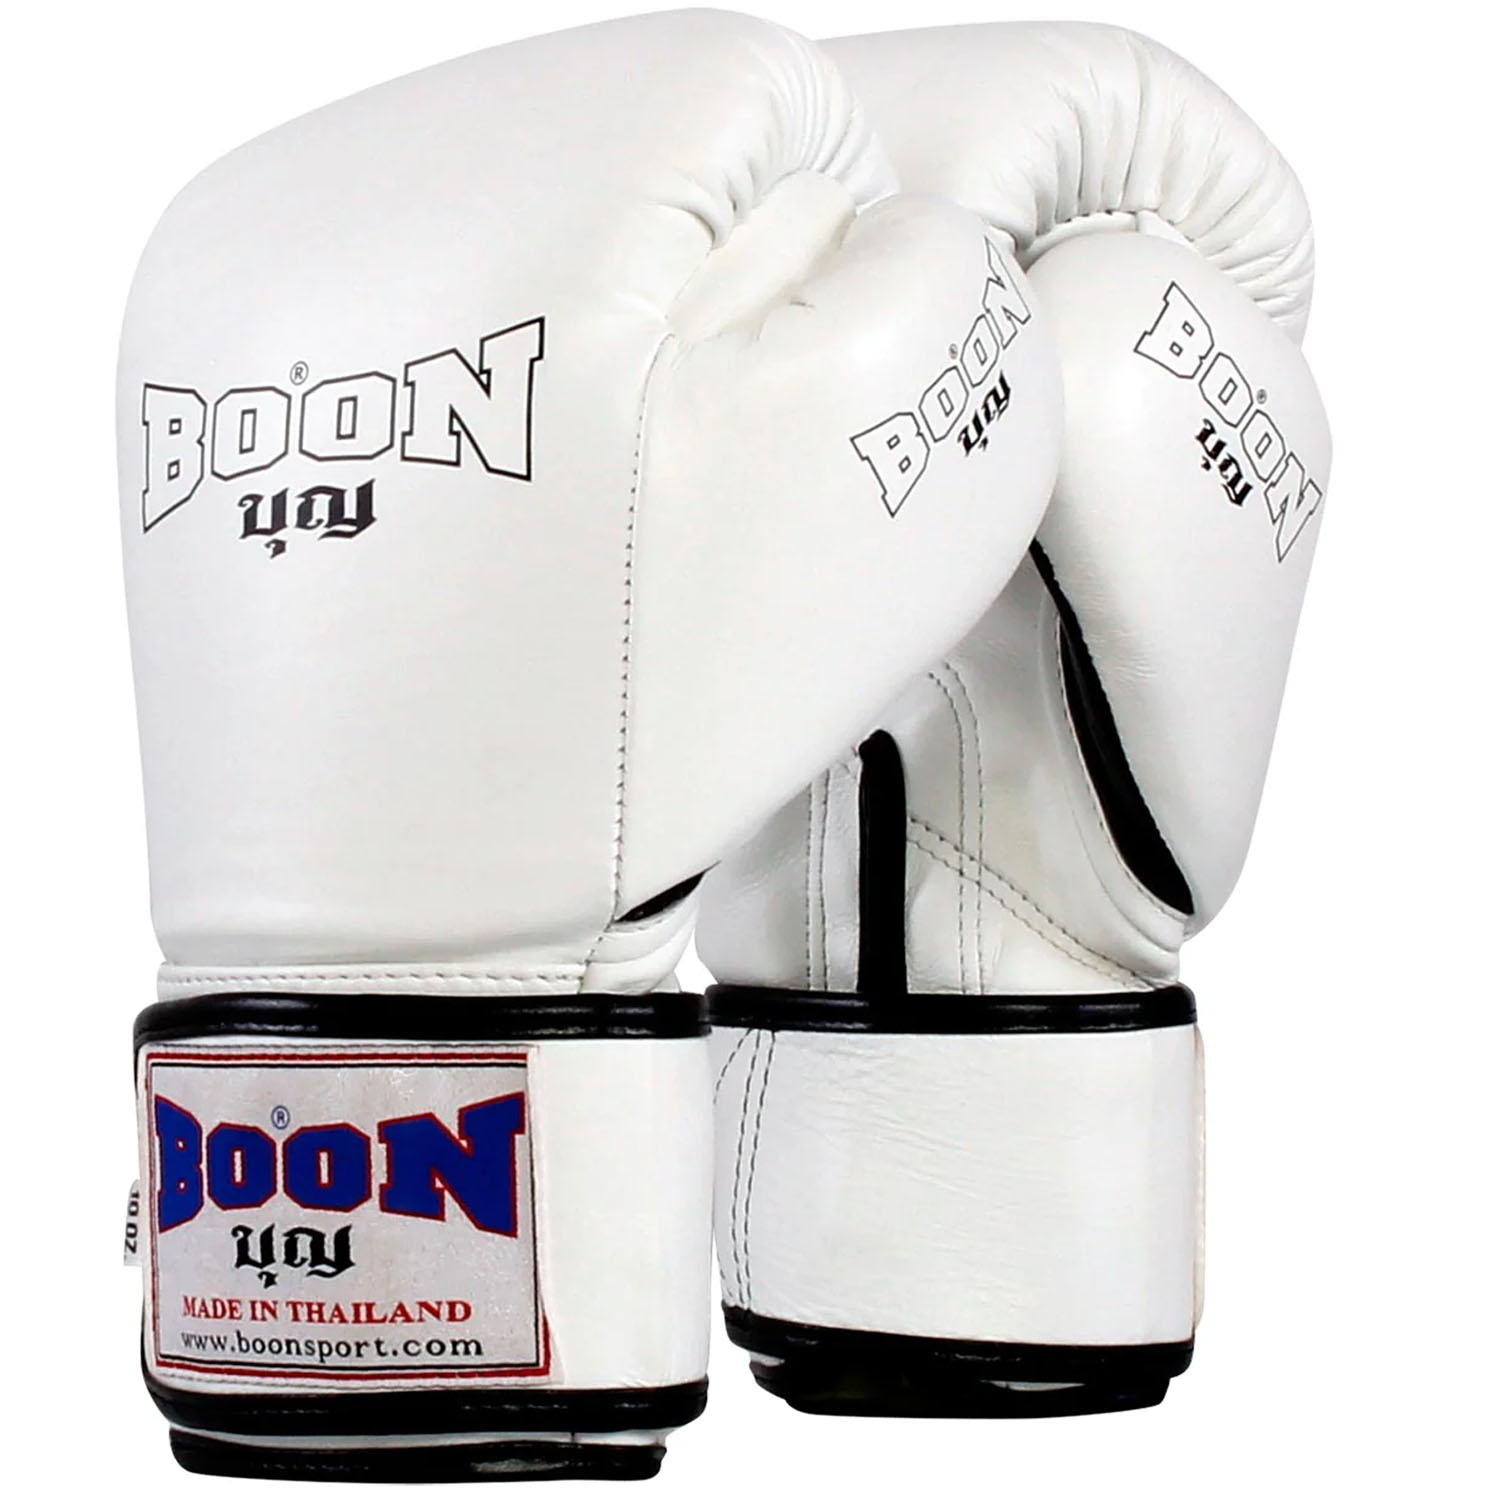 BOON Boxing Gloves, BGCBK, Compact Velcro, white